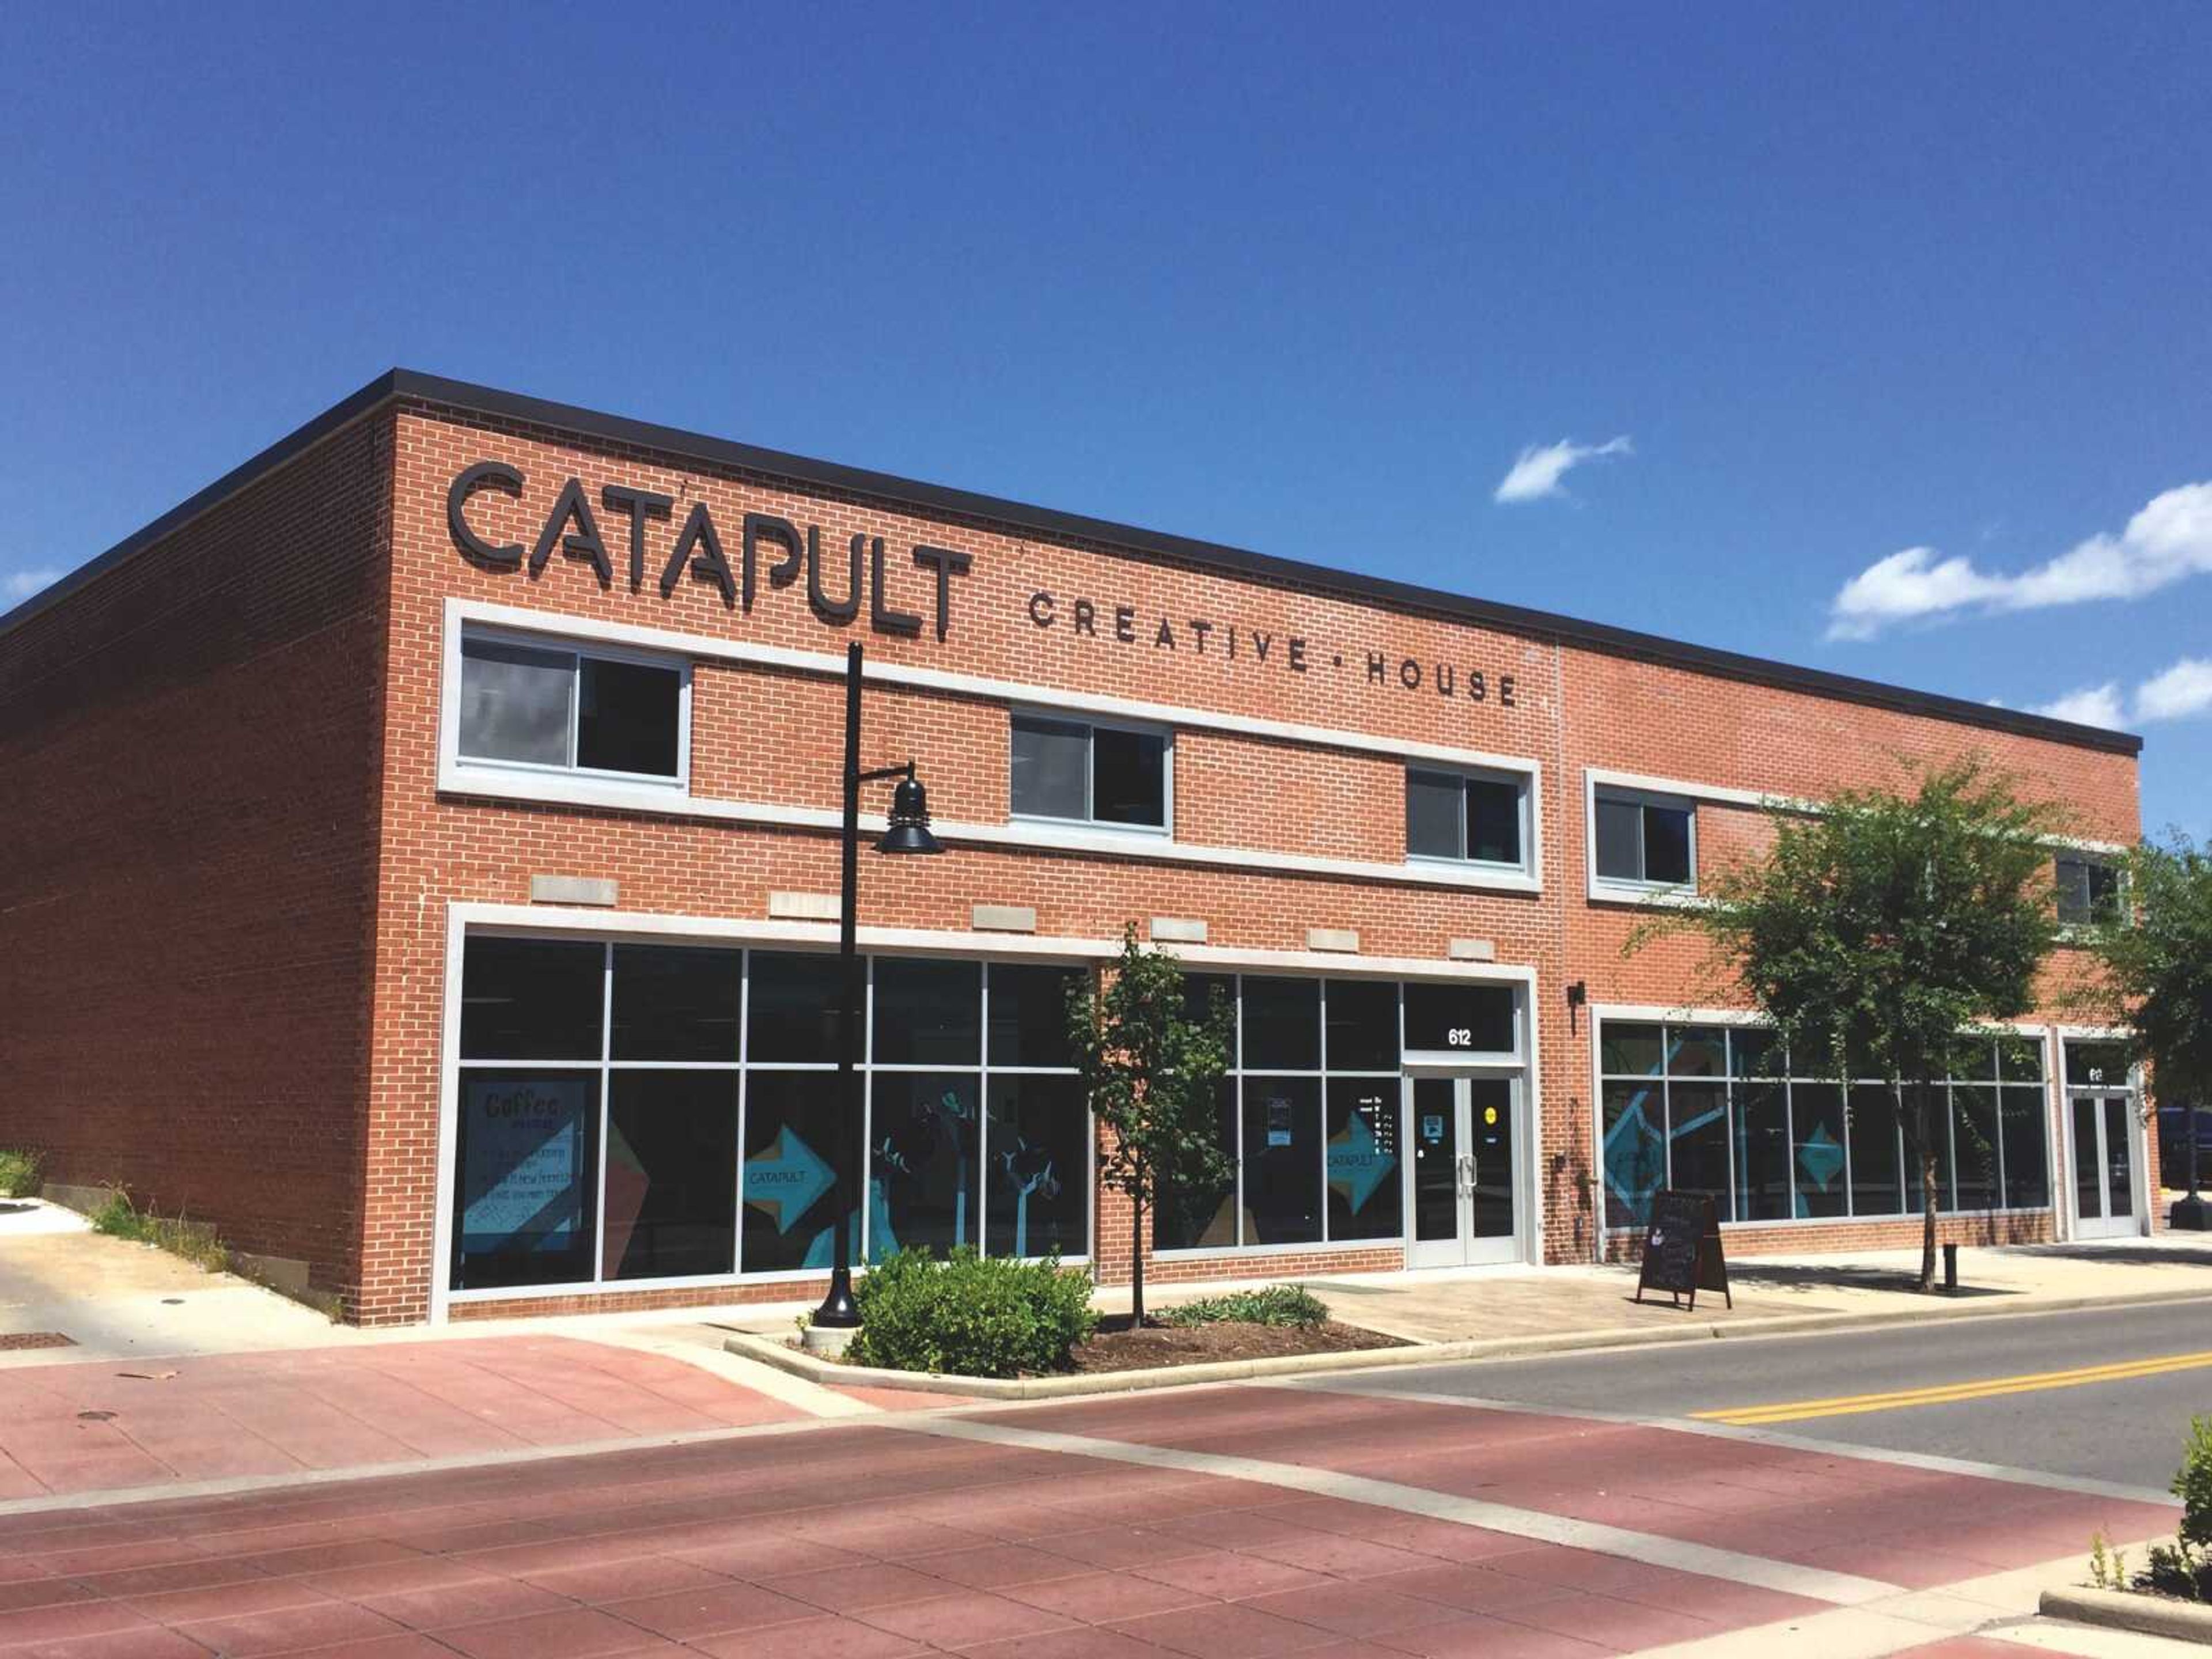 Professional Networking 101 will take place from 6-8 p.m. on April 5 at Catapult Creative House.